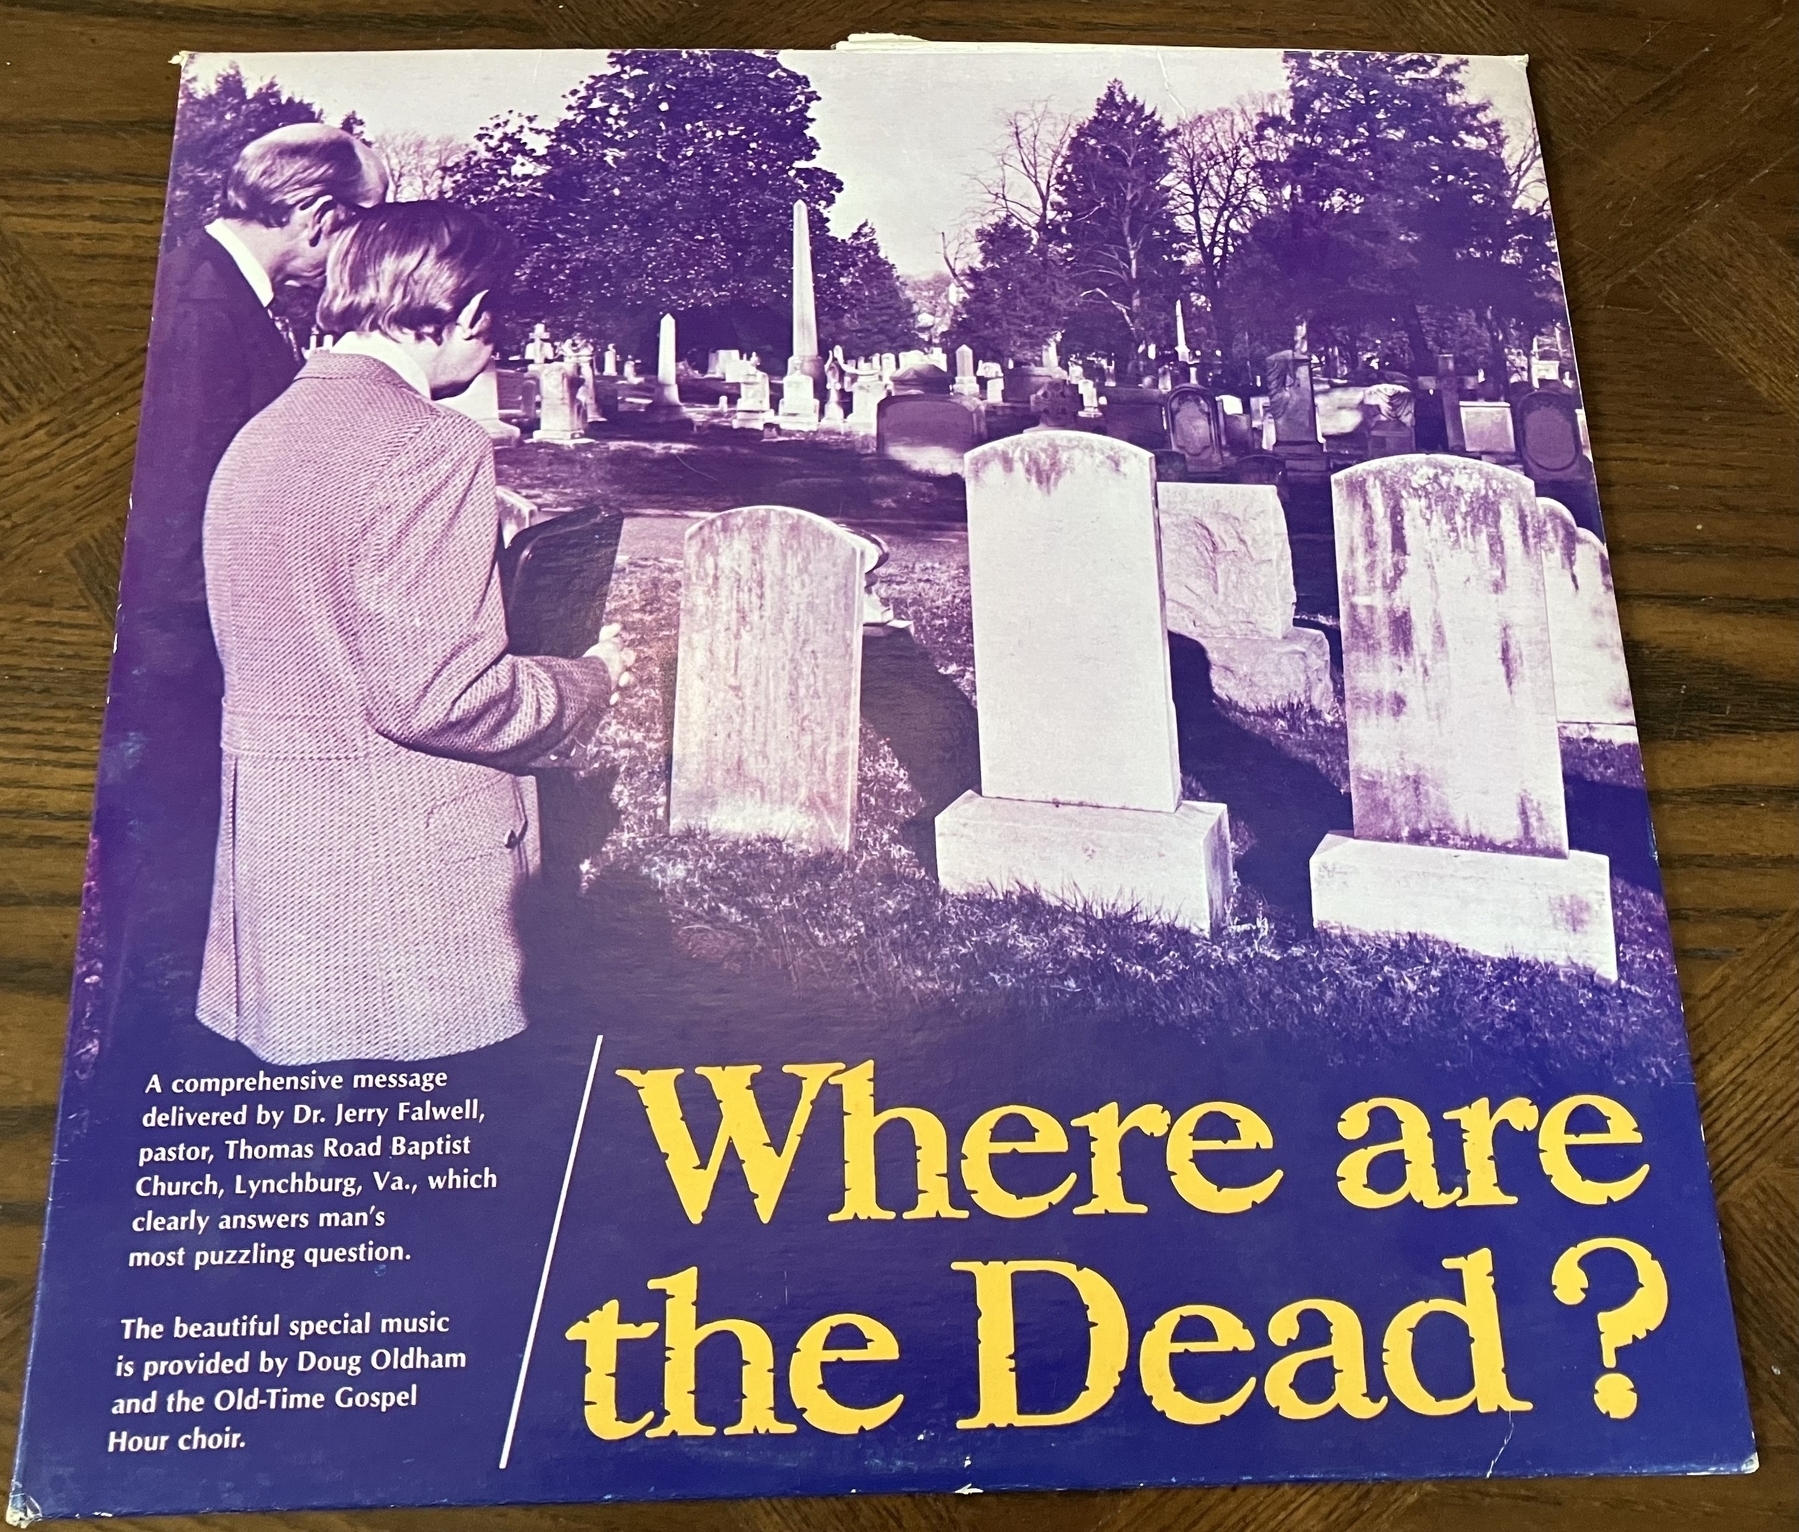 Purple tinged photograph of two men standing before a row of grave stones, with the album title “where are the dead?”